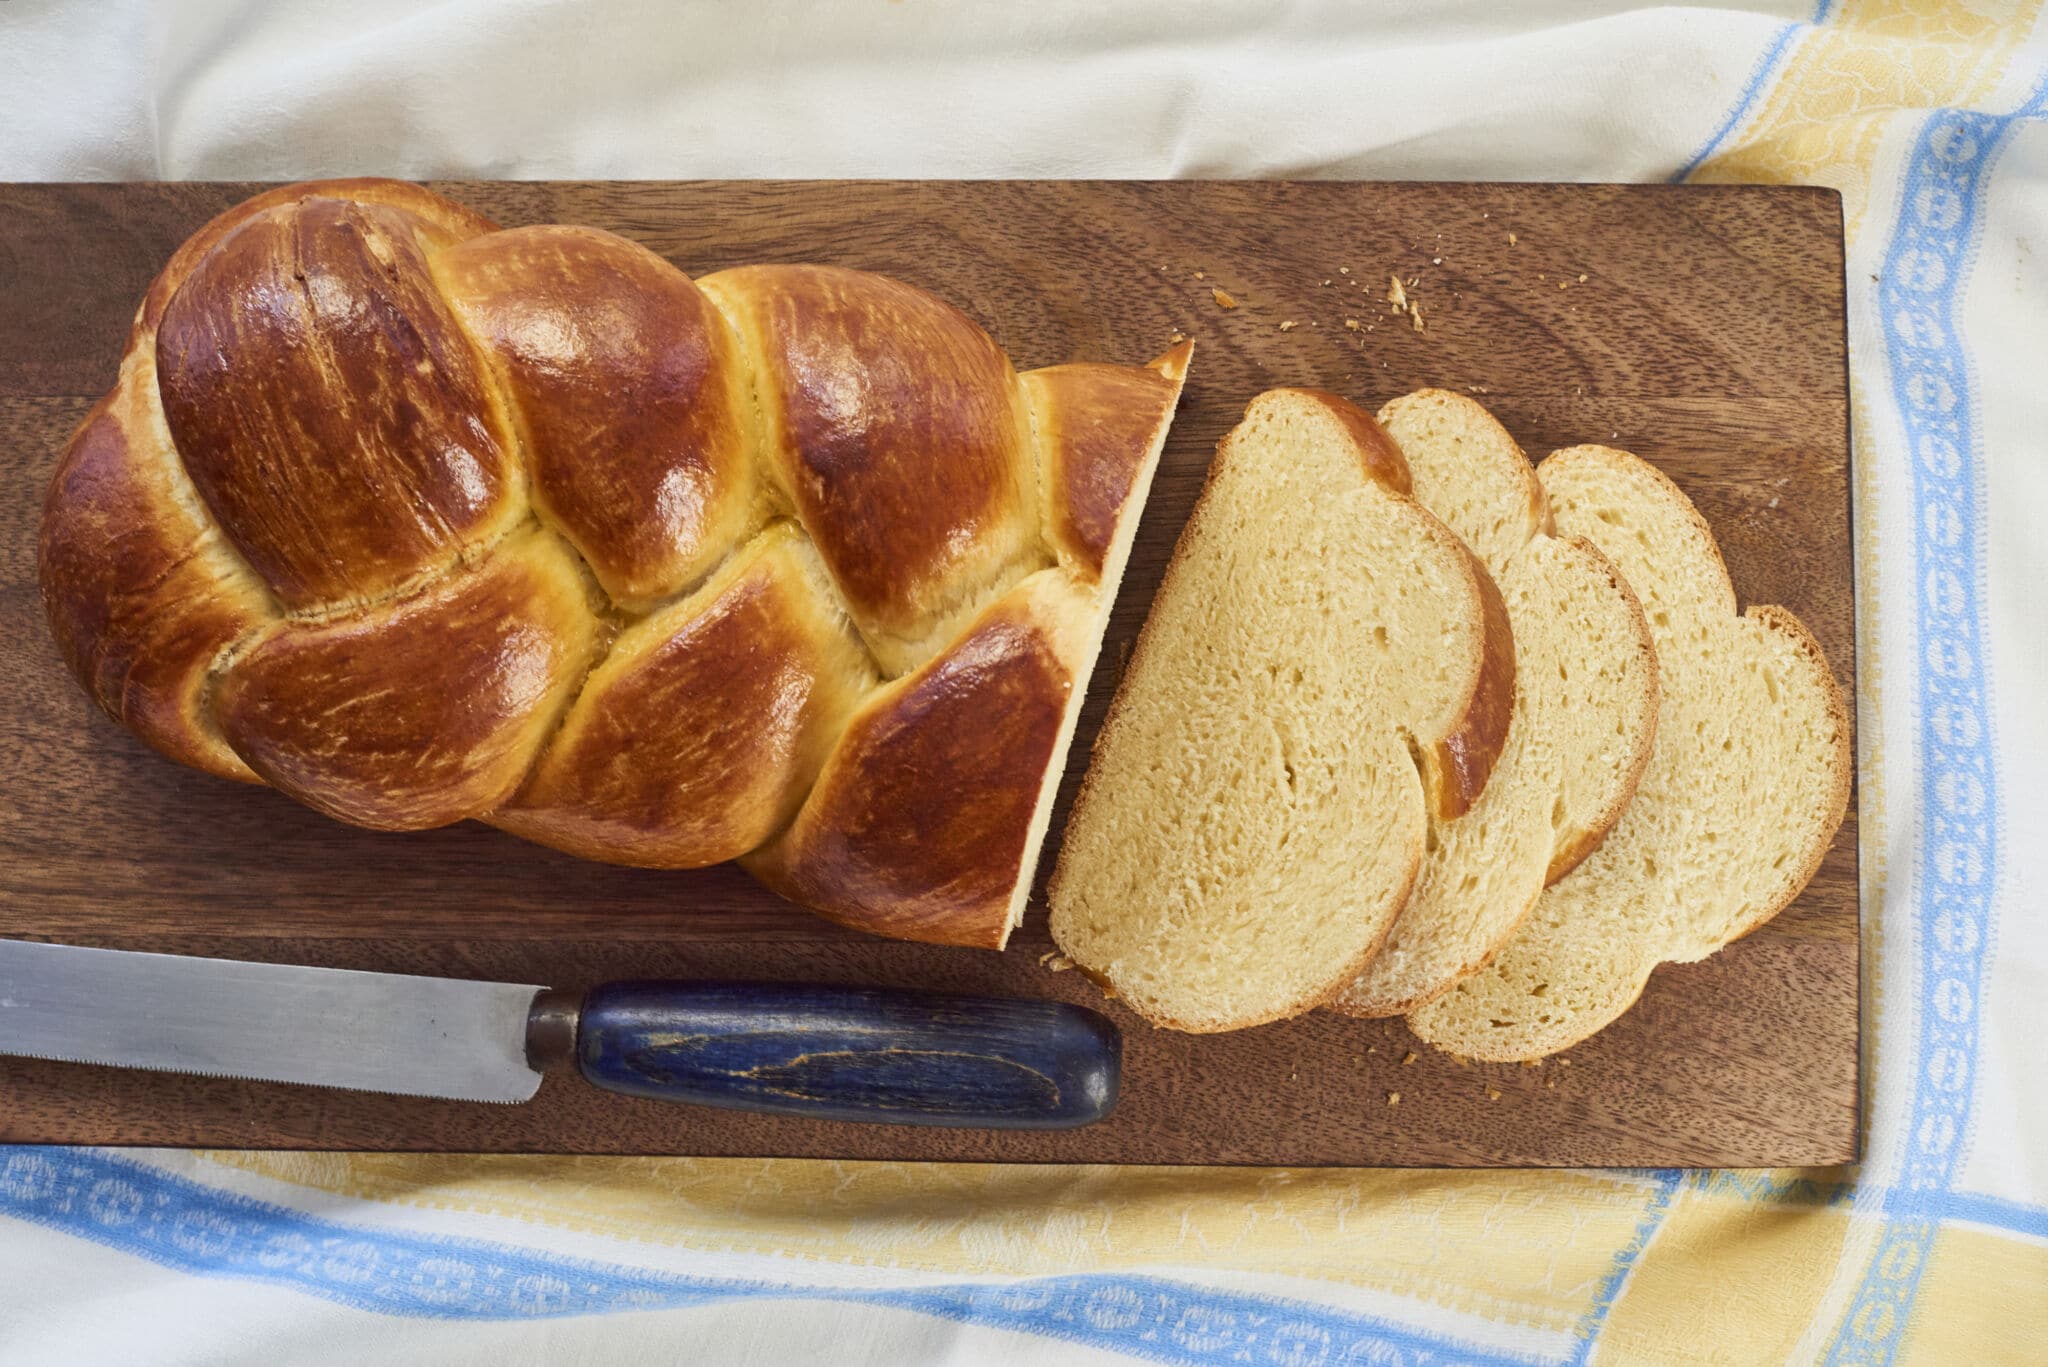 A loaf of homemade Challah bread is served on a cutting board. Three slices have been made in the loaf.